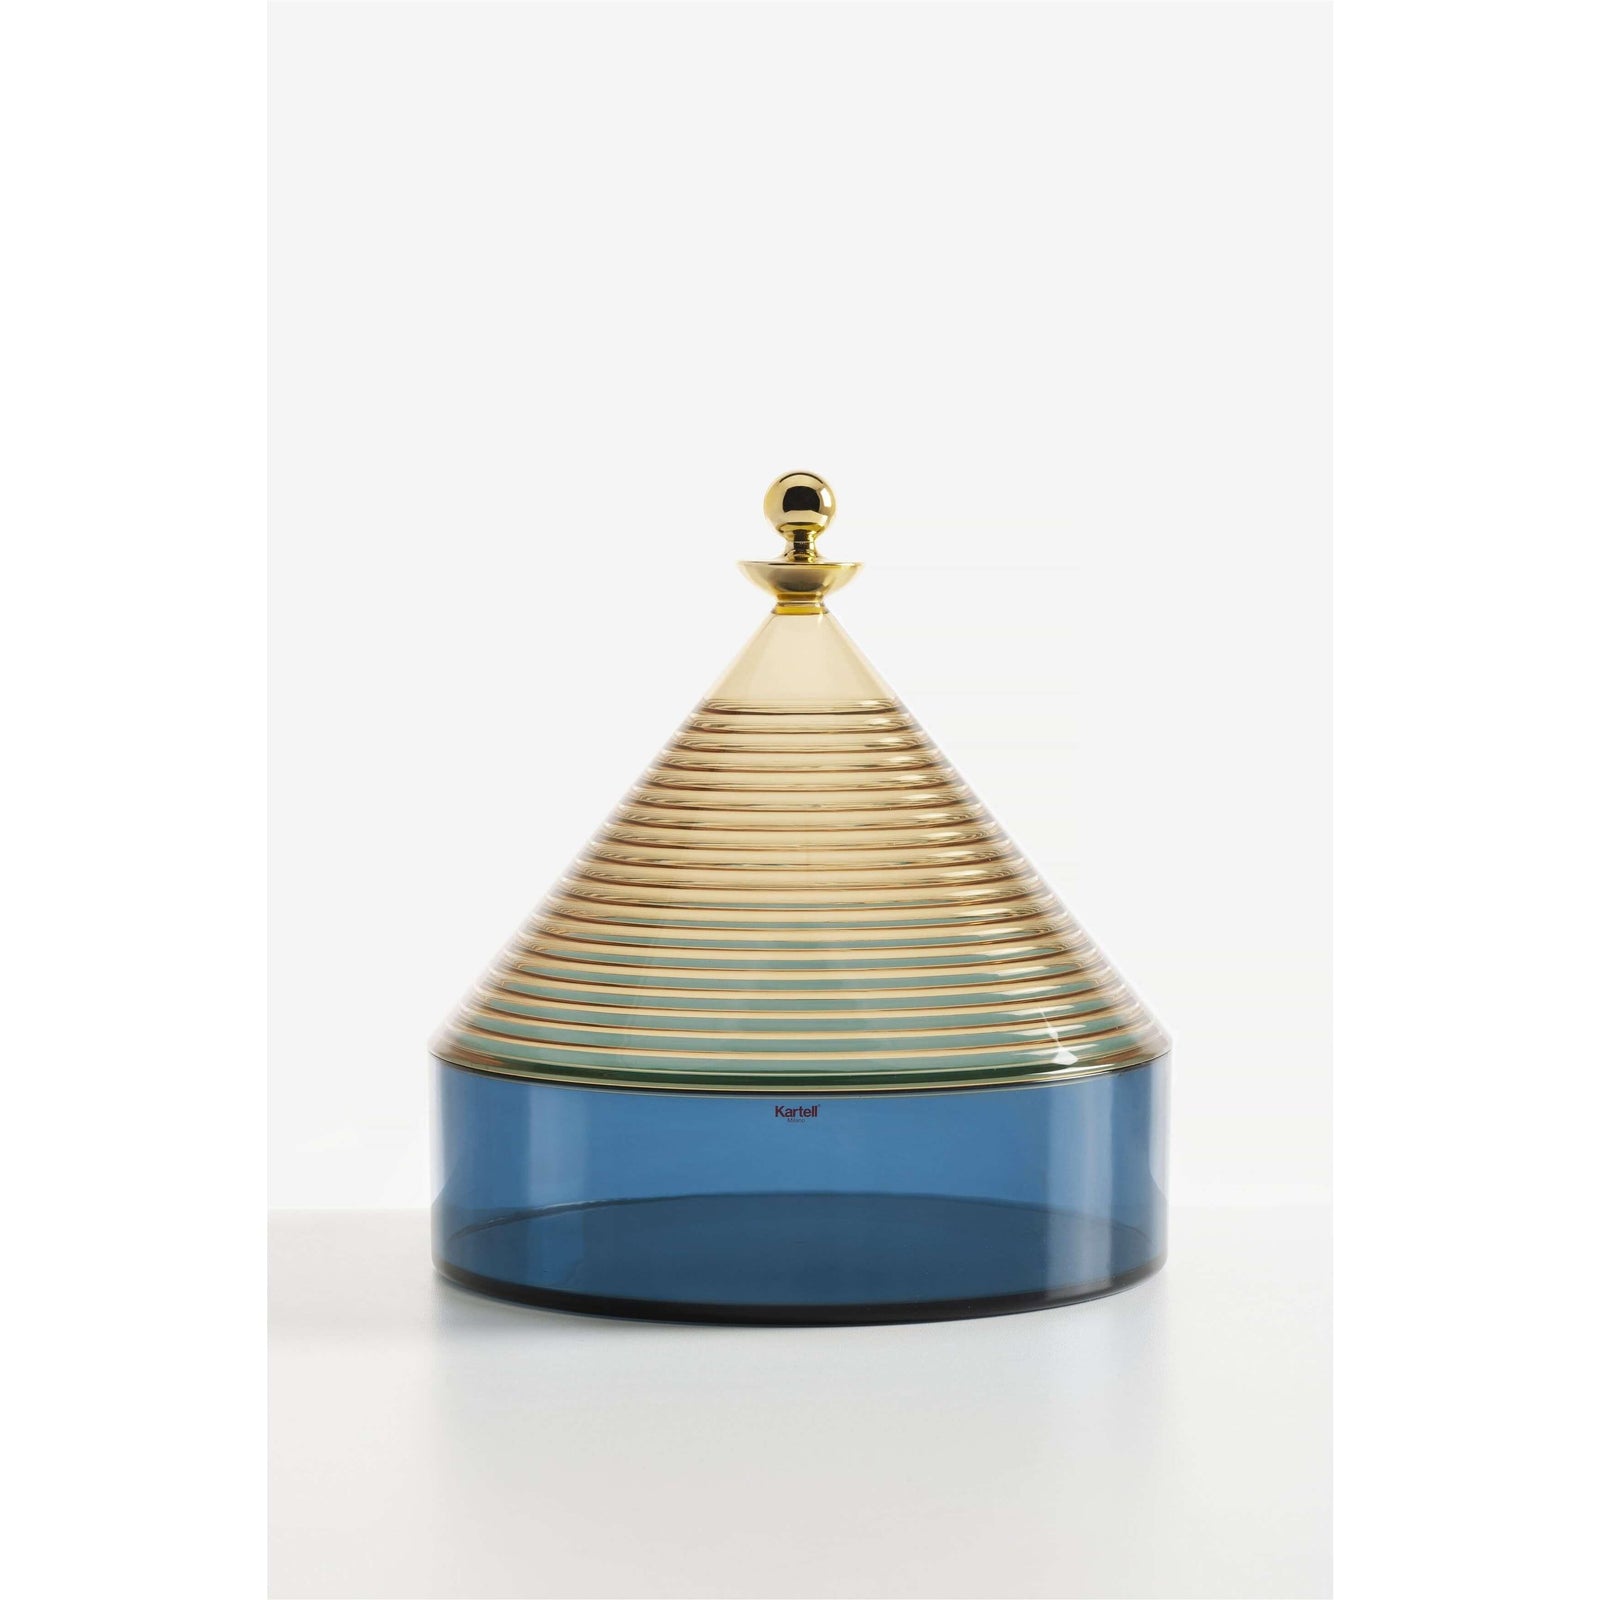 Trullo Candy Dish - Curated - Tableware - Kartell